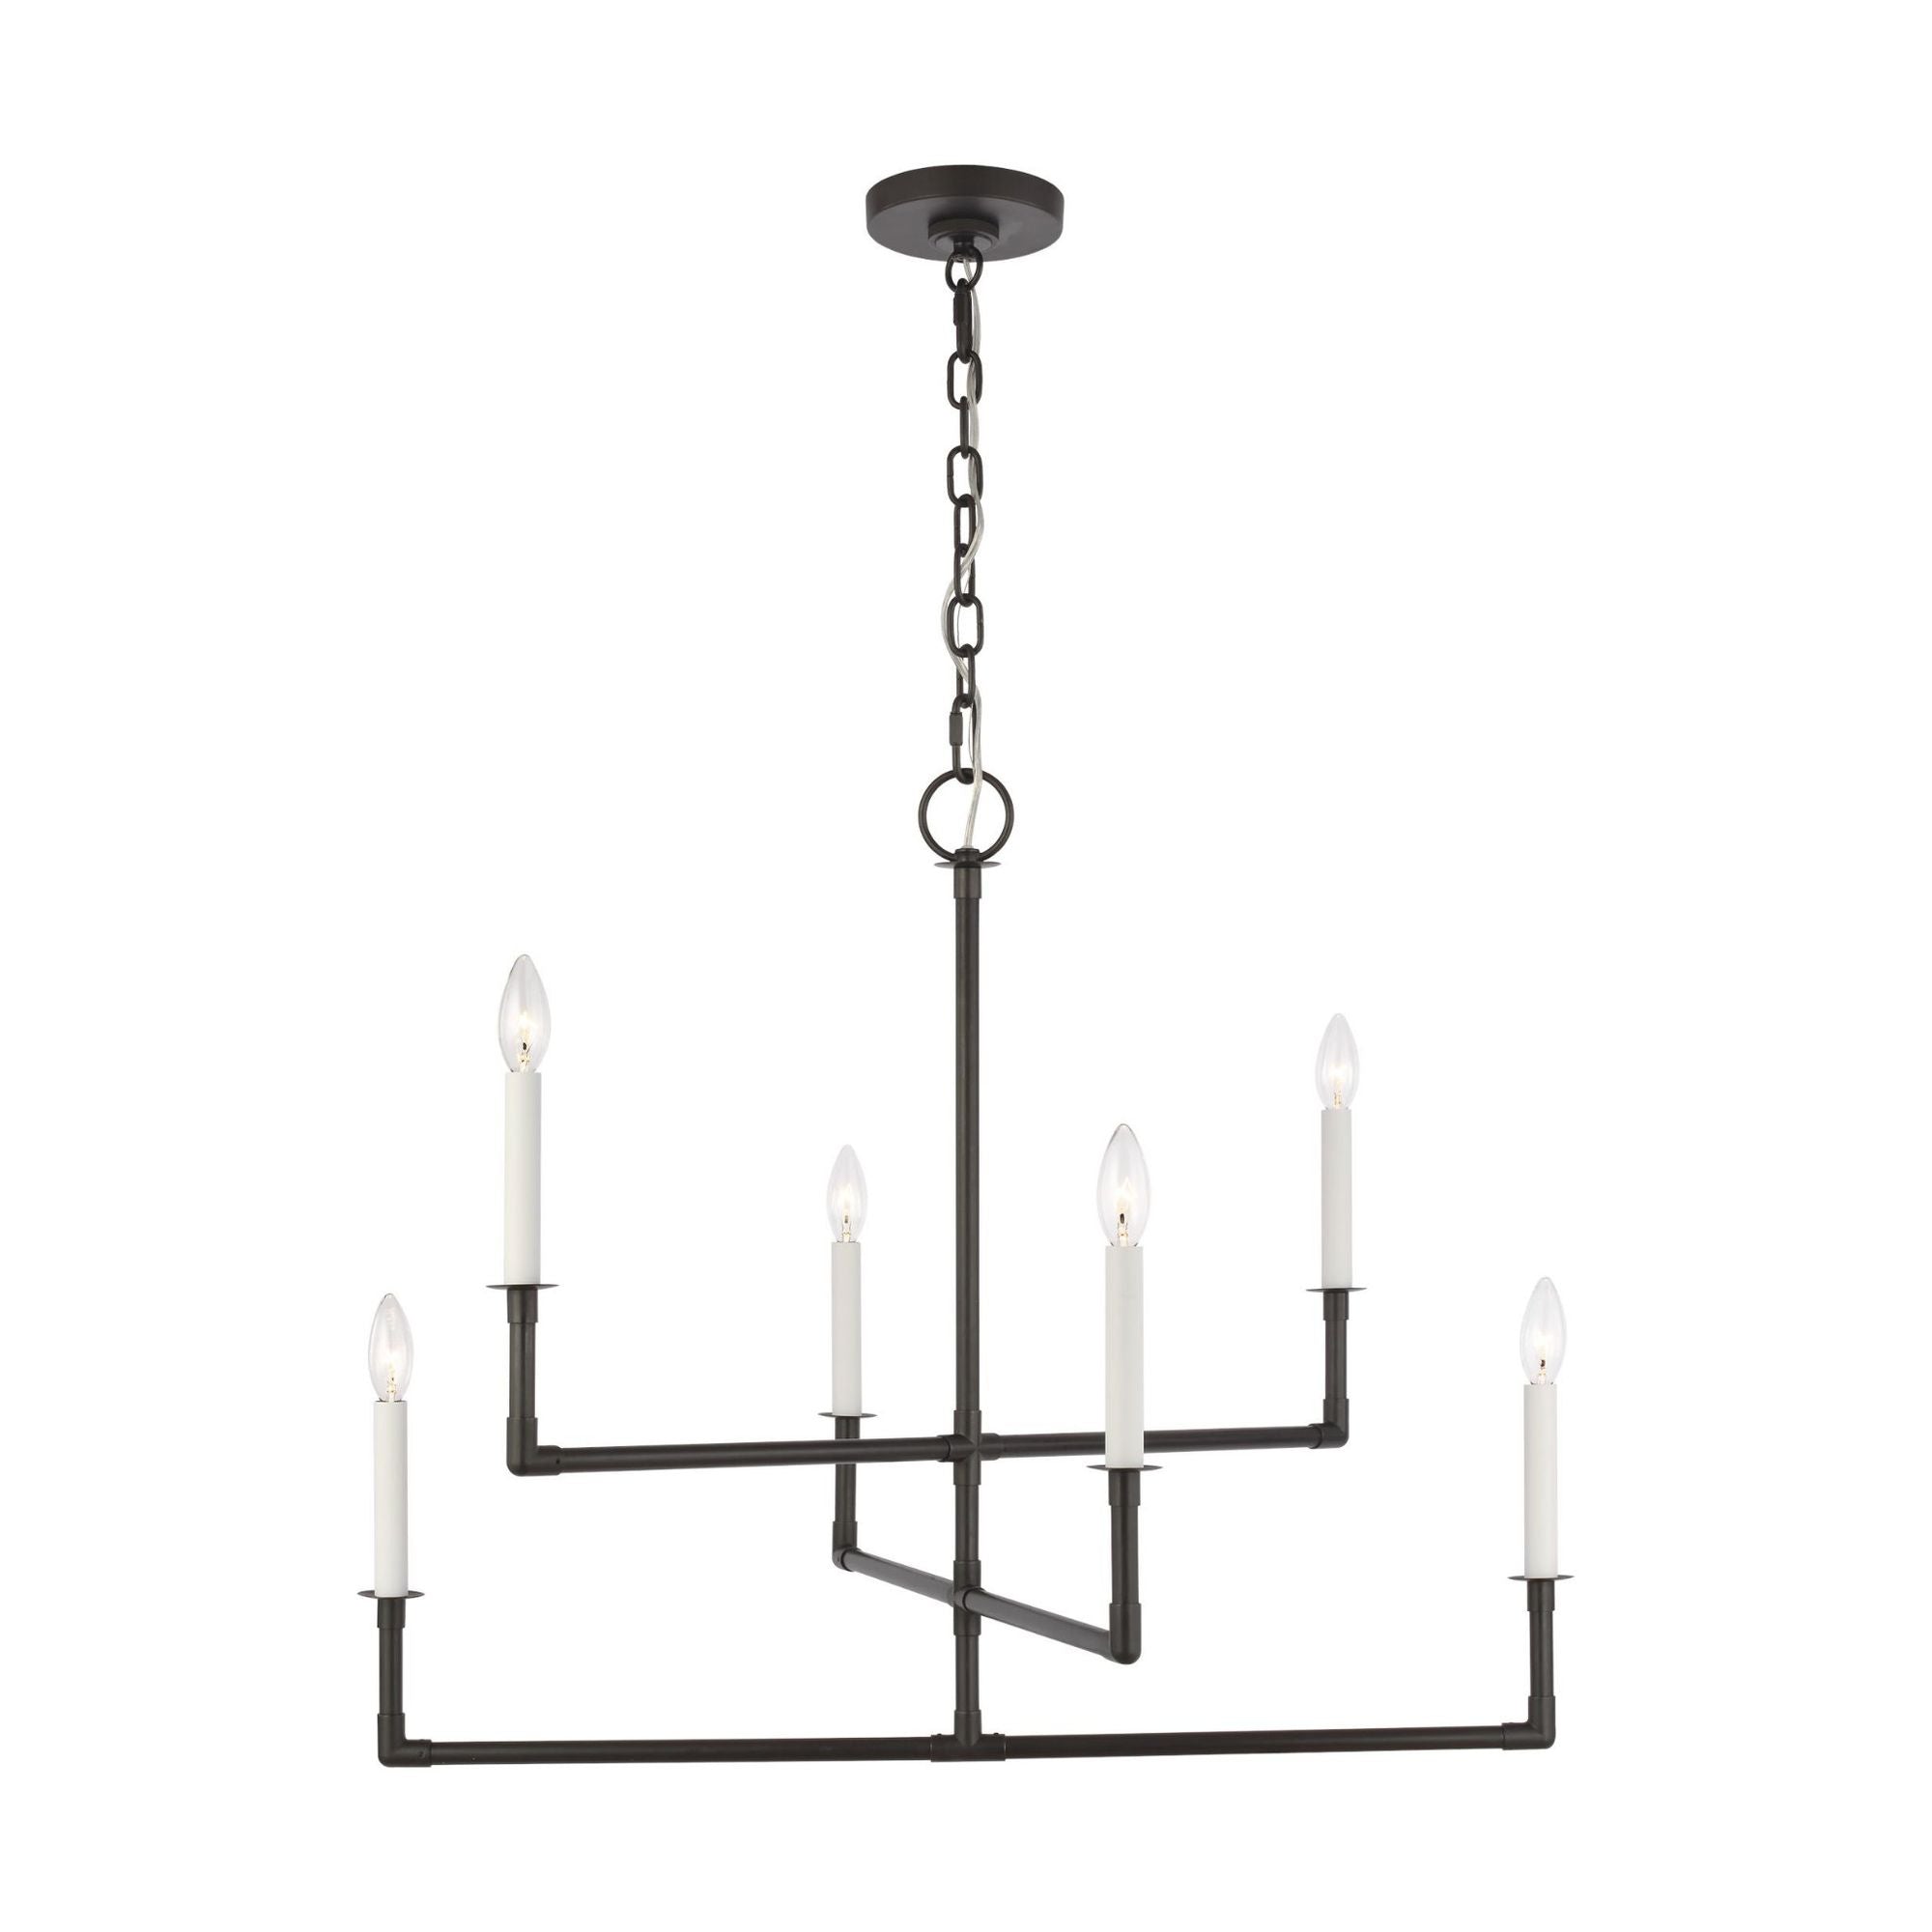 Chapman & Myers Bayview Medium Chandelier in Aged Iron